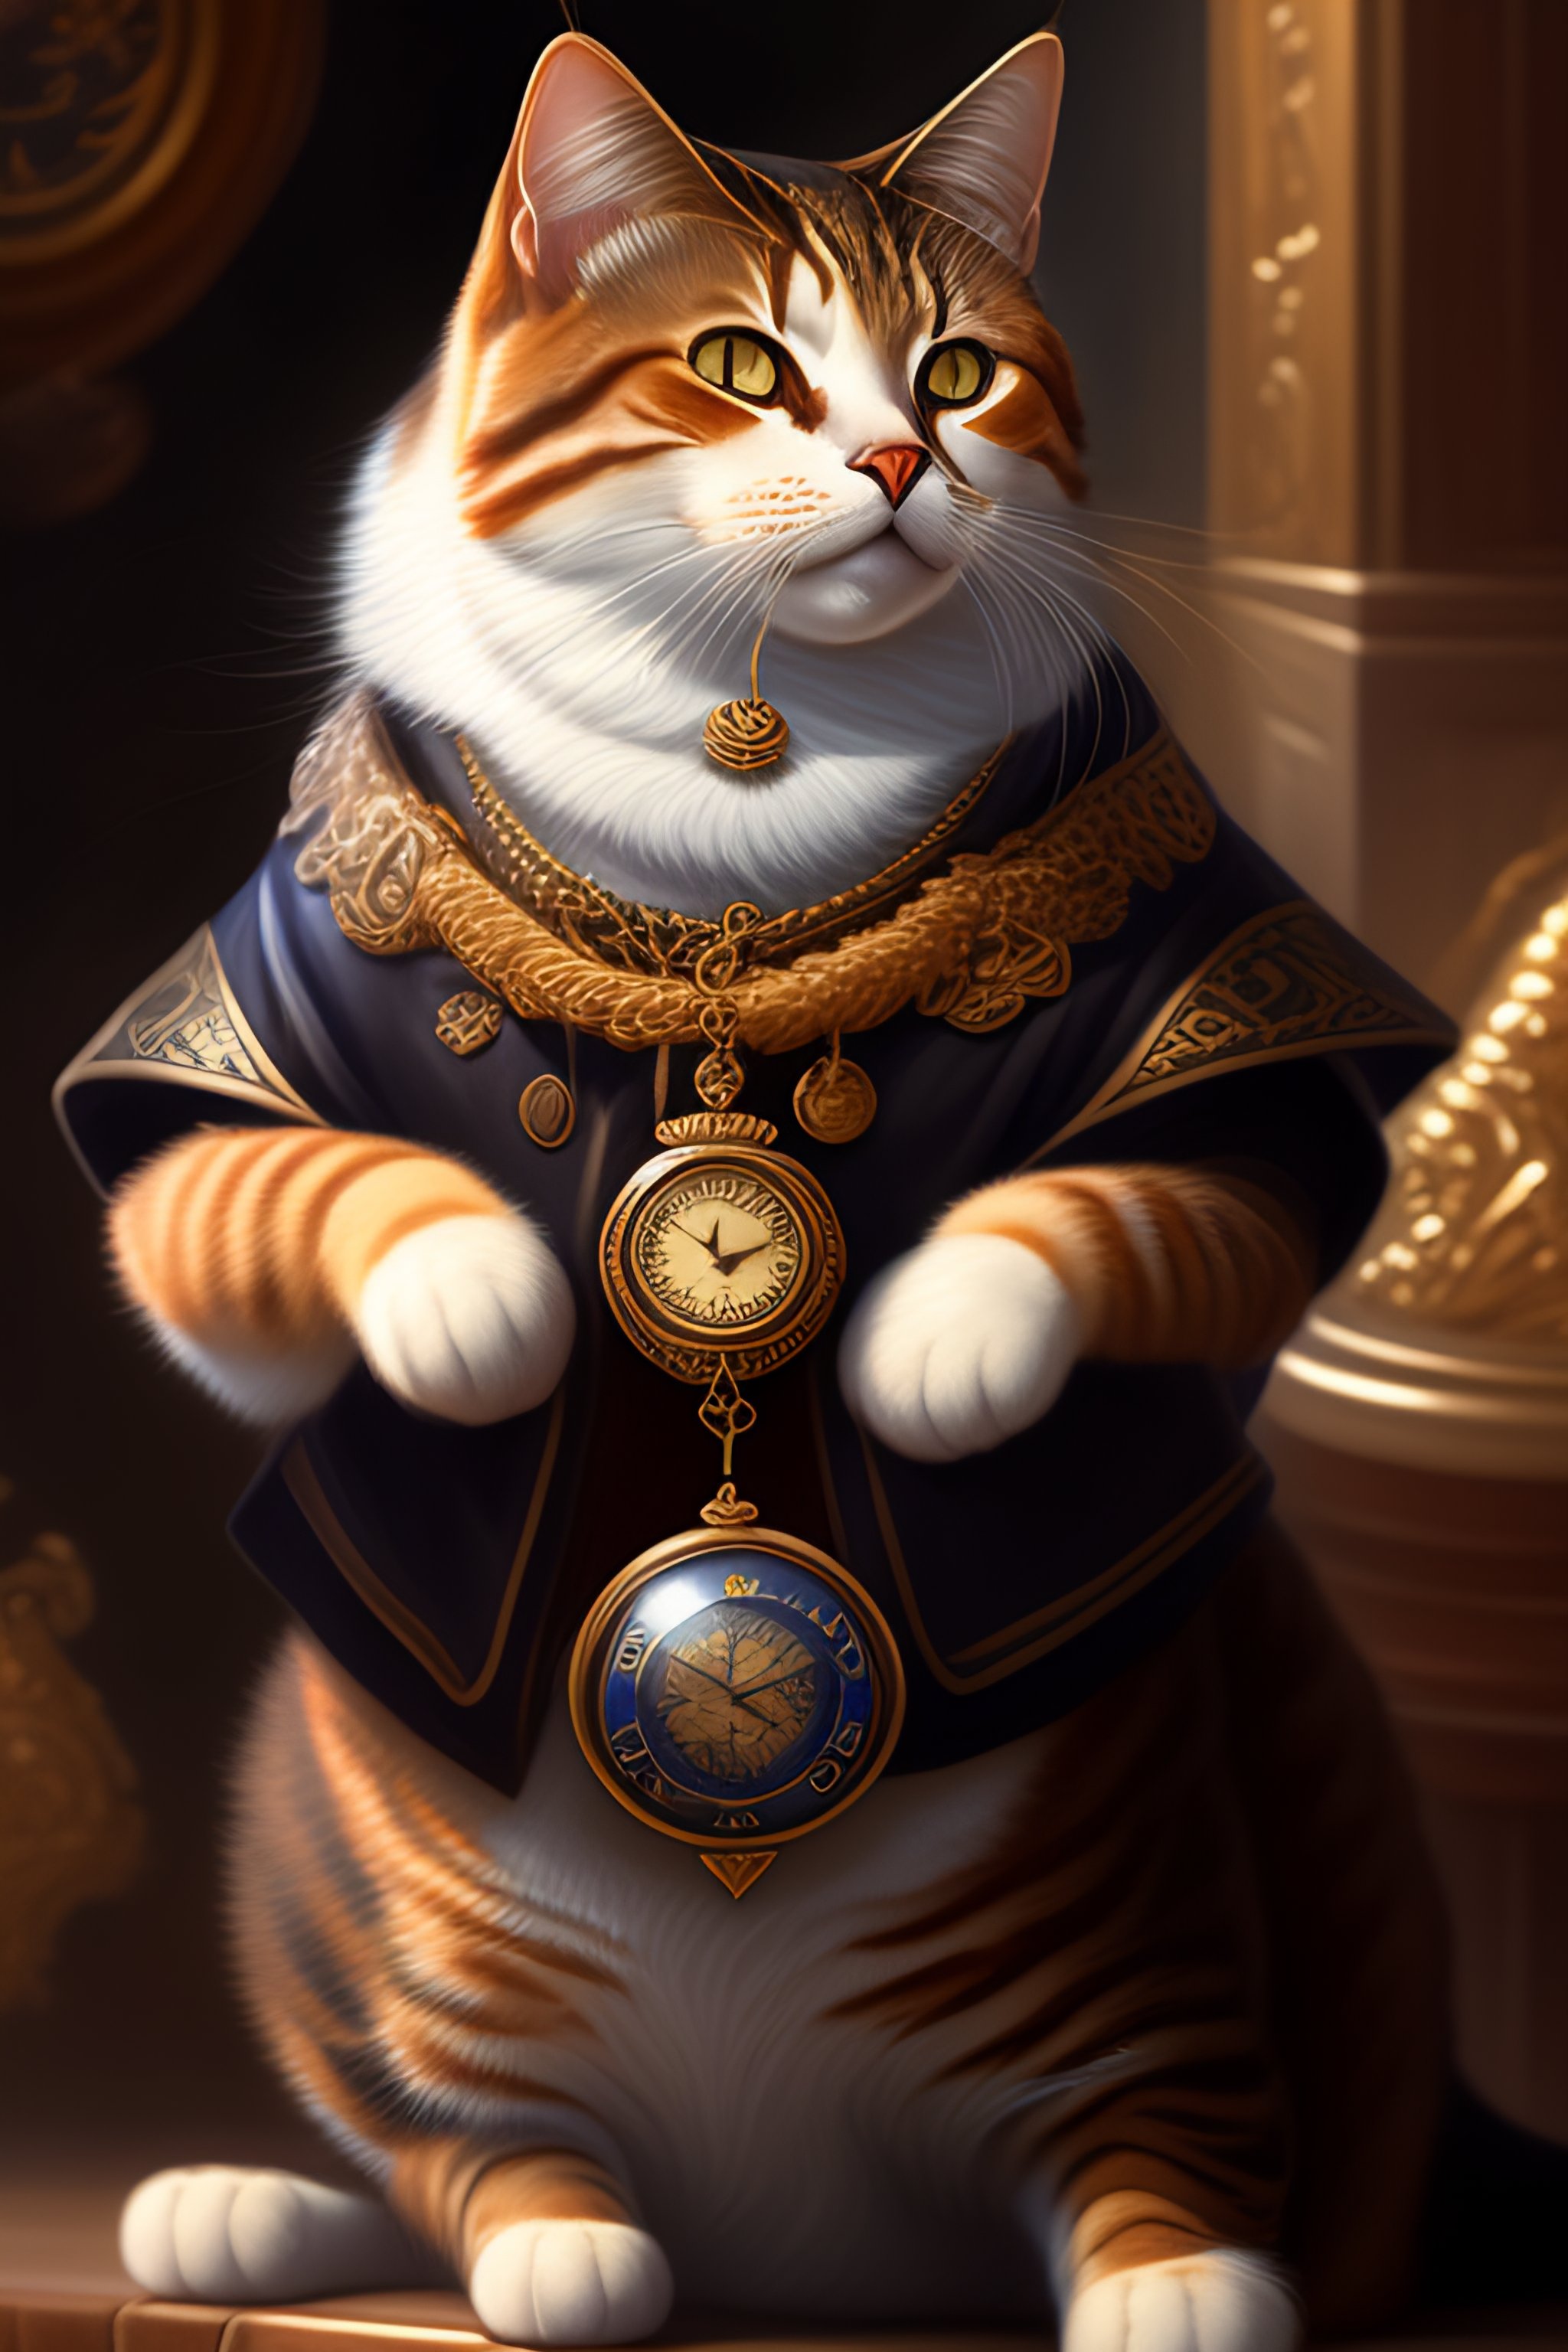 Lexica - A detailed portrait of a tabby cat holding a pocket watch